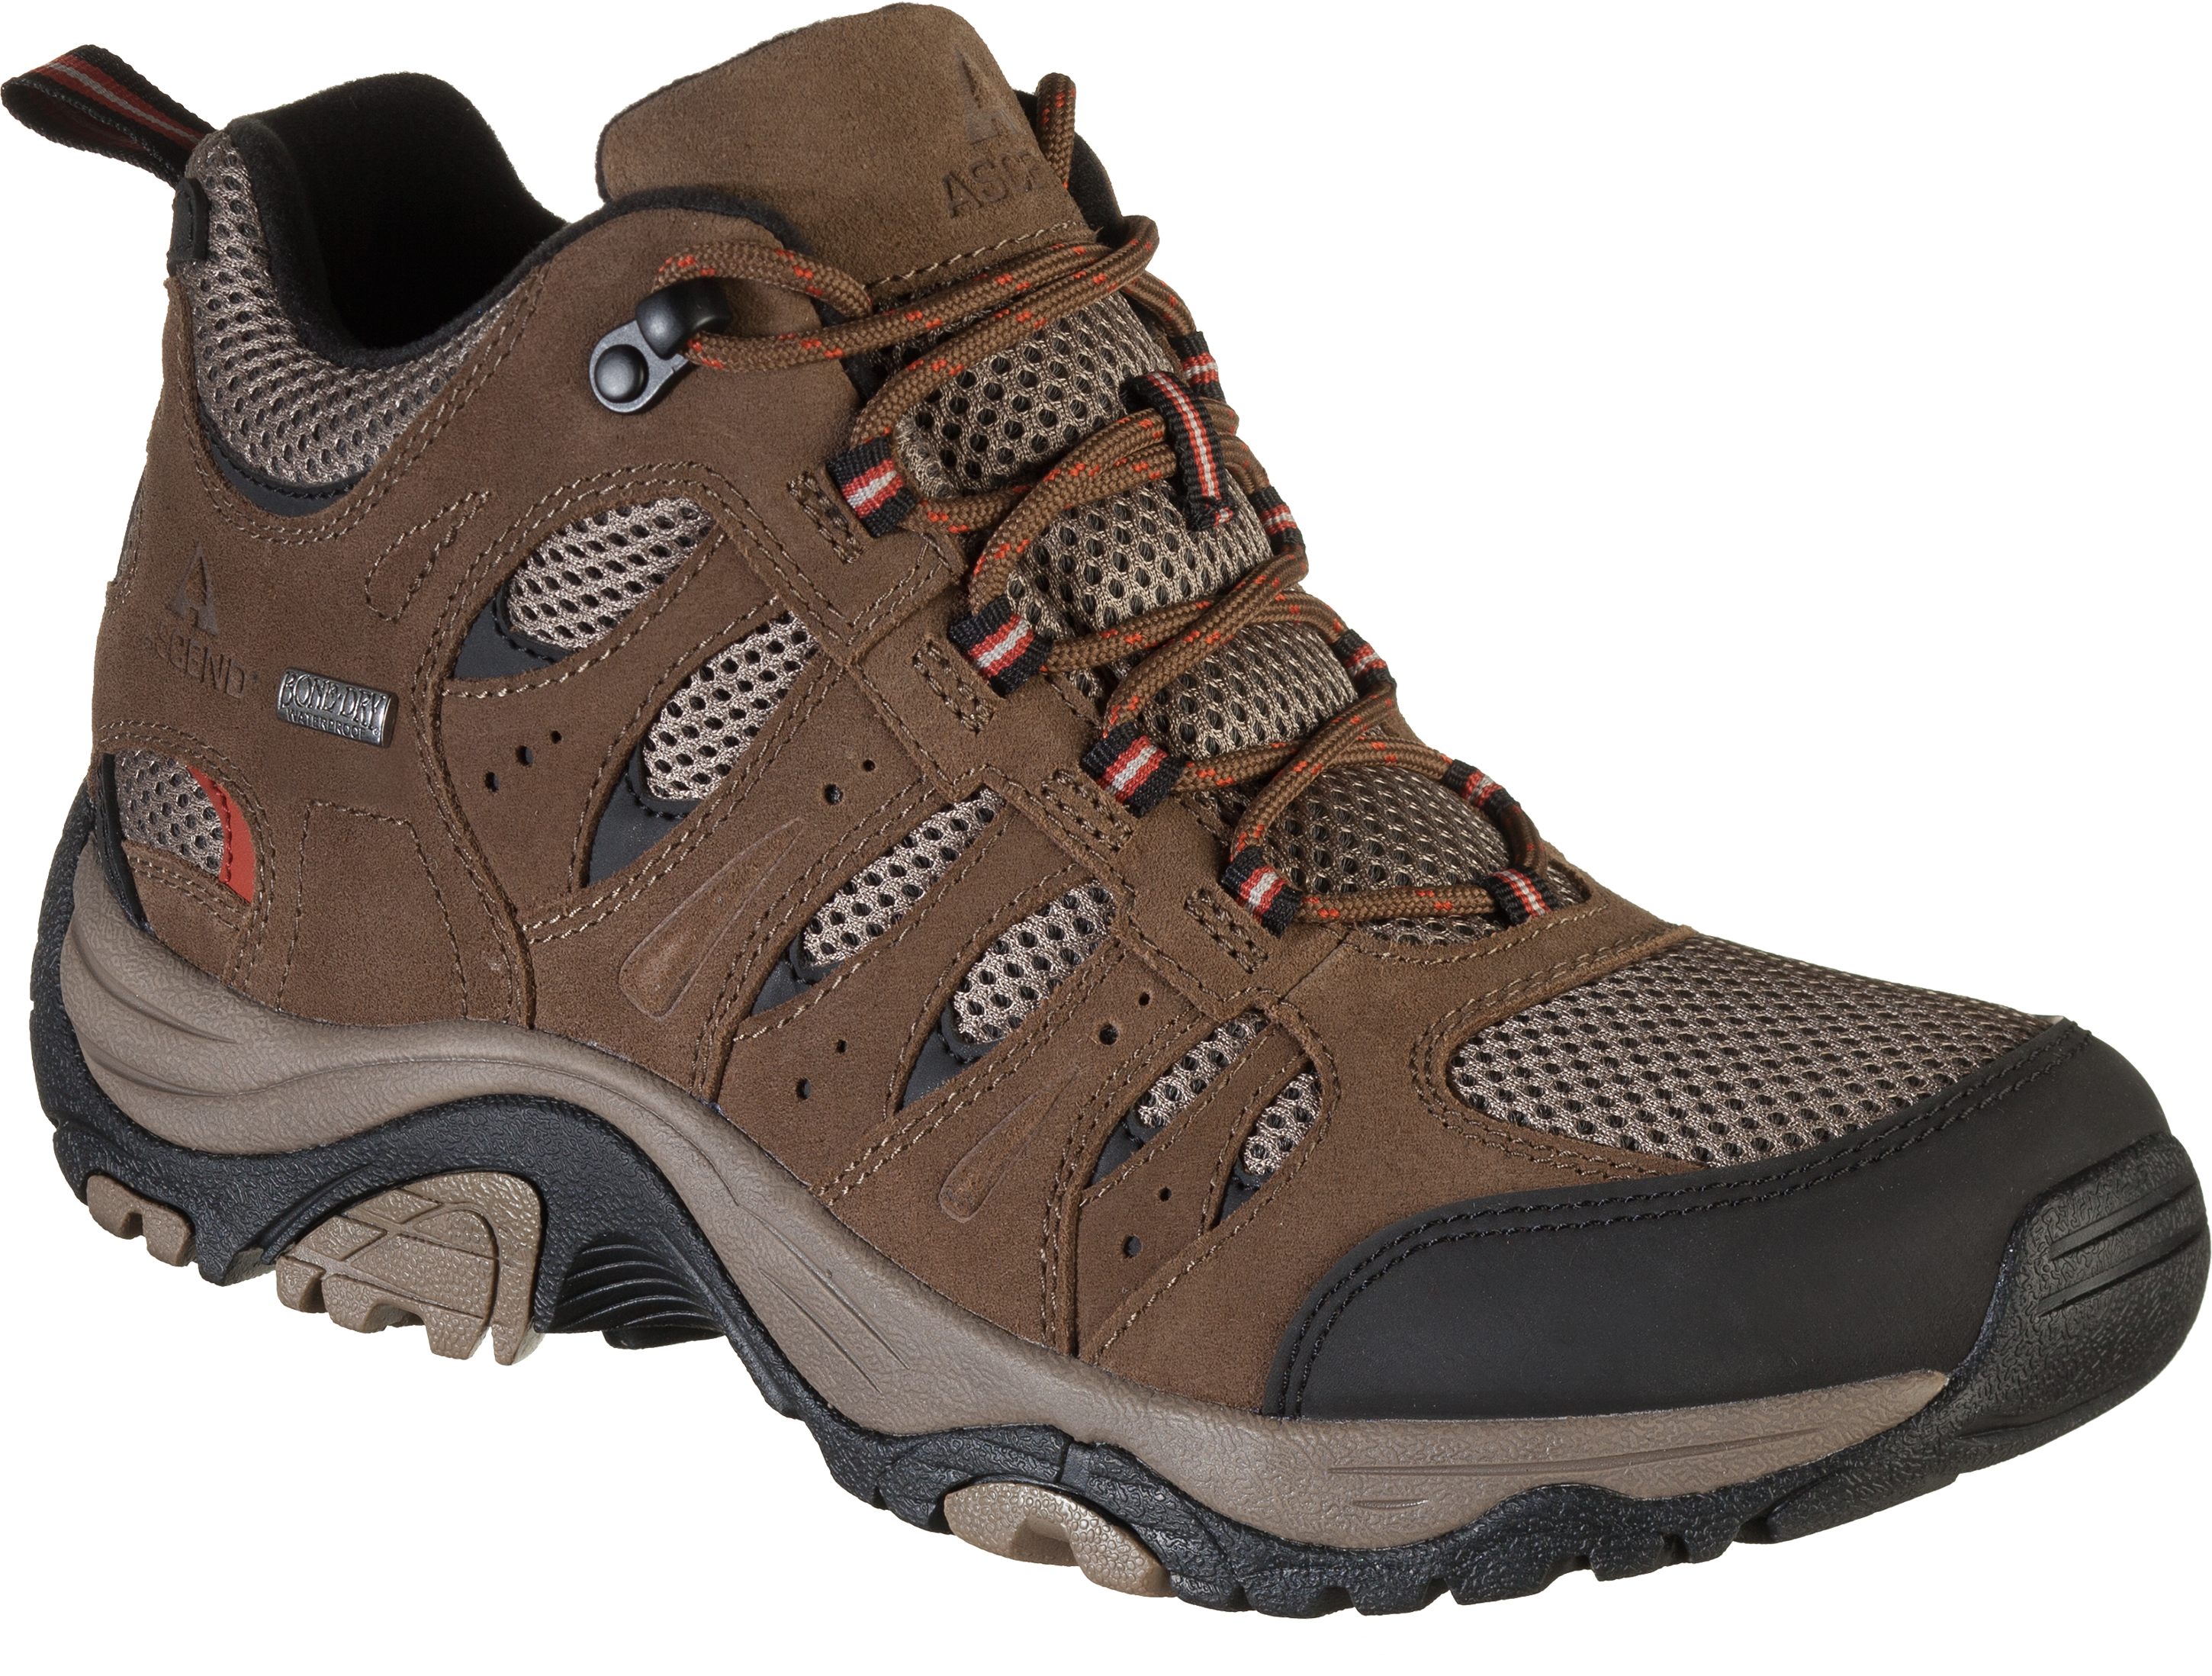 Ascend Lisco Mid Waterproof Hiking Boots for Men - Chocolate - 8.5M